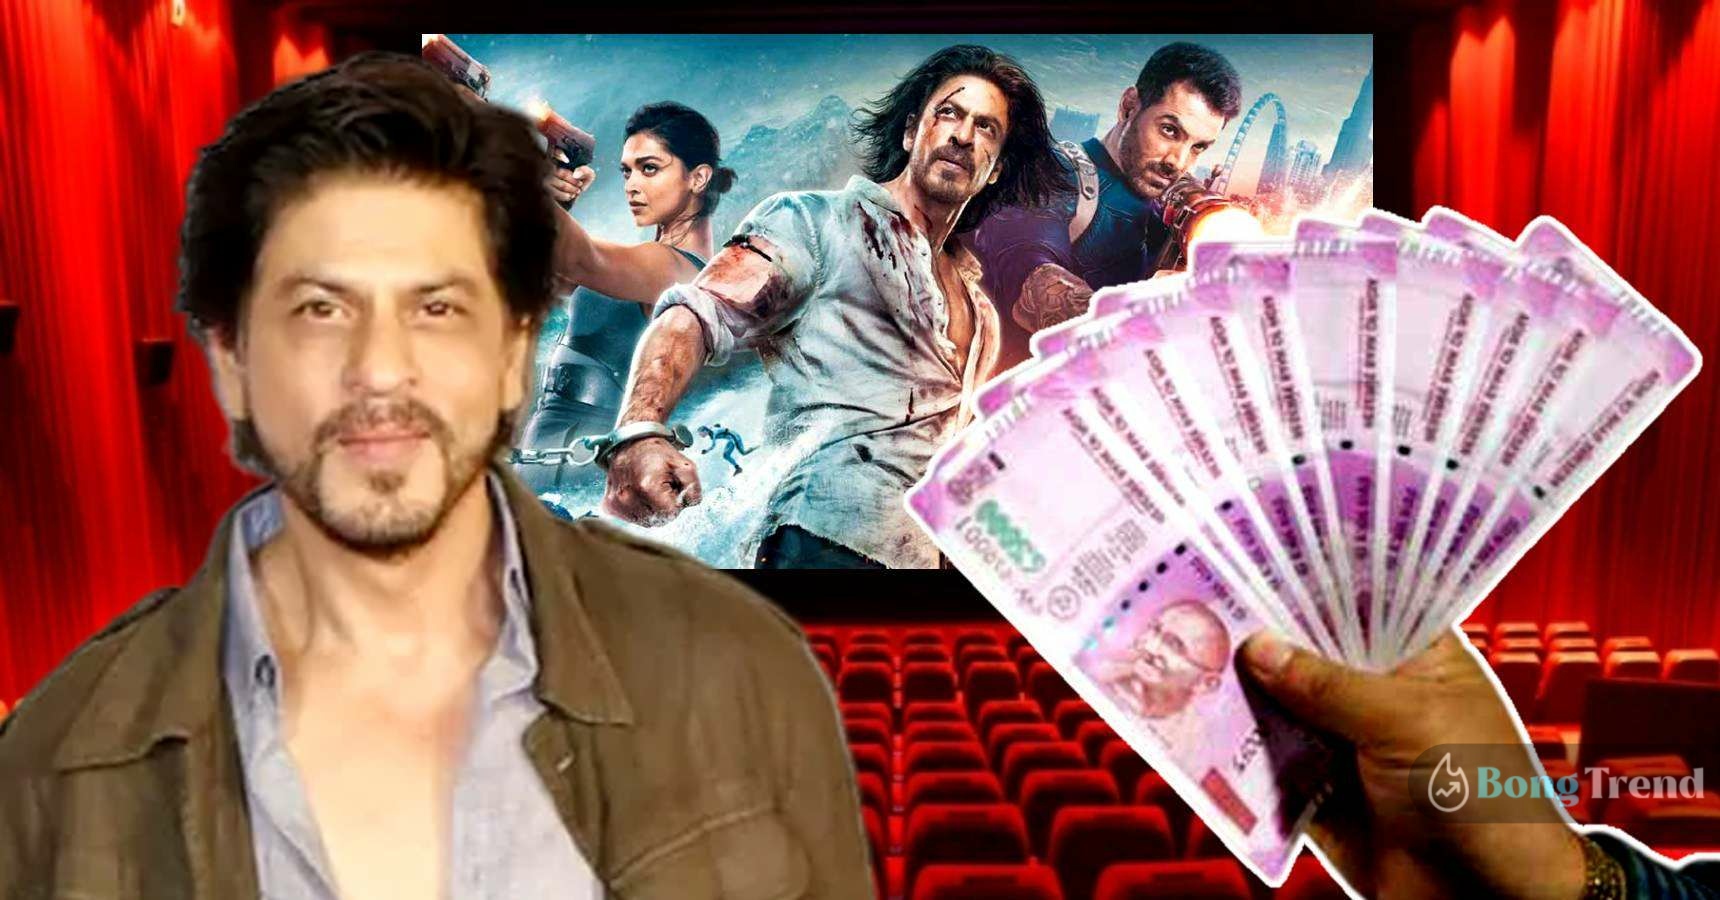 Shahrukh Khan Pathaan Housefull in Cinemas Ticket costs whooping 2000 Rs